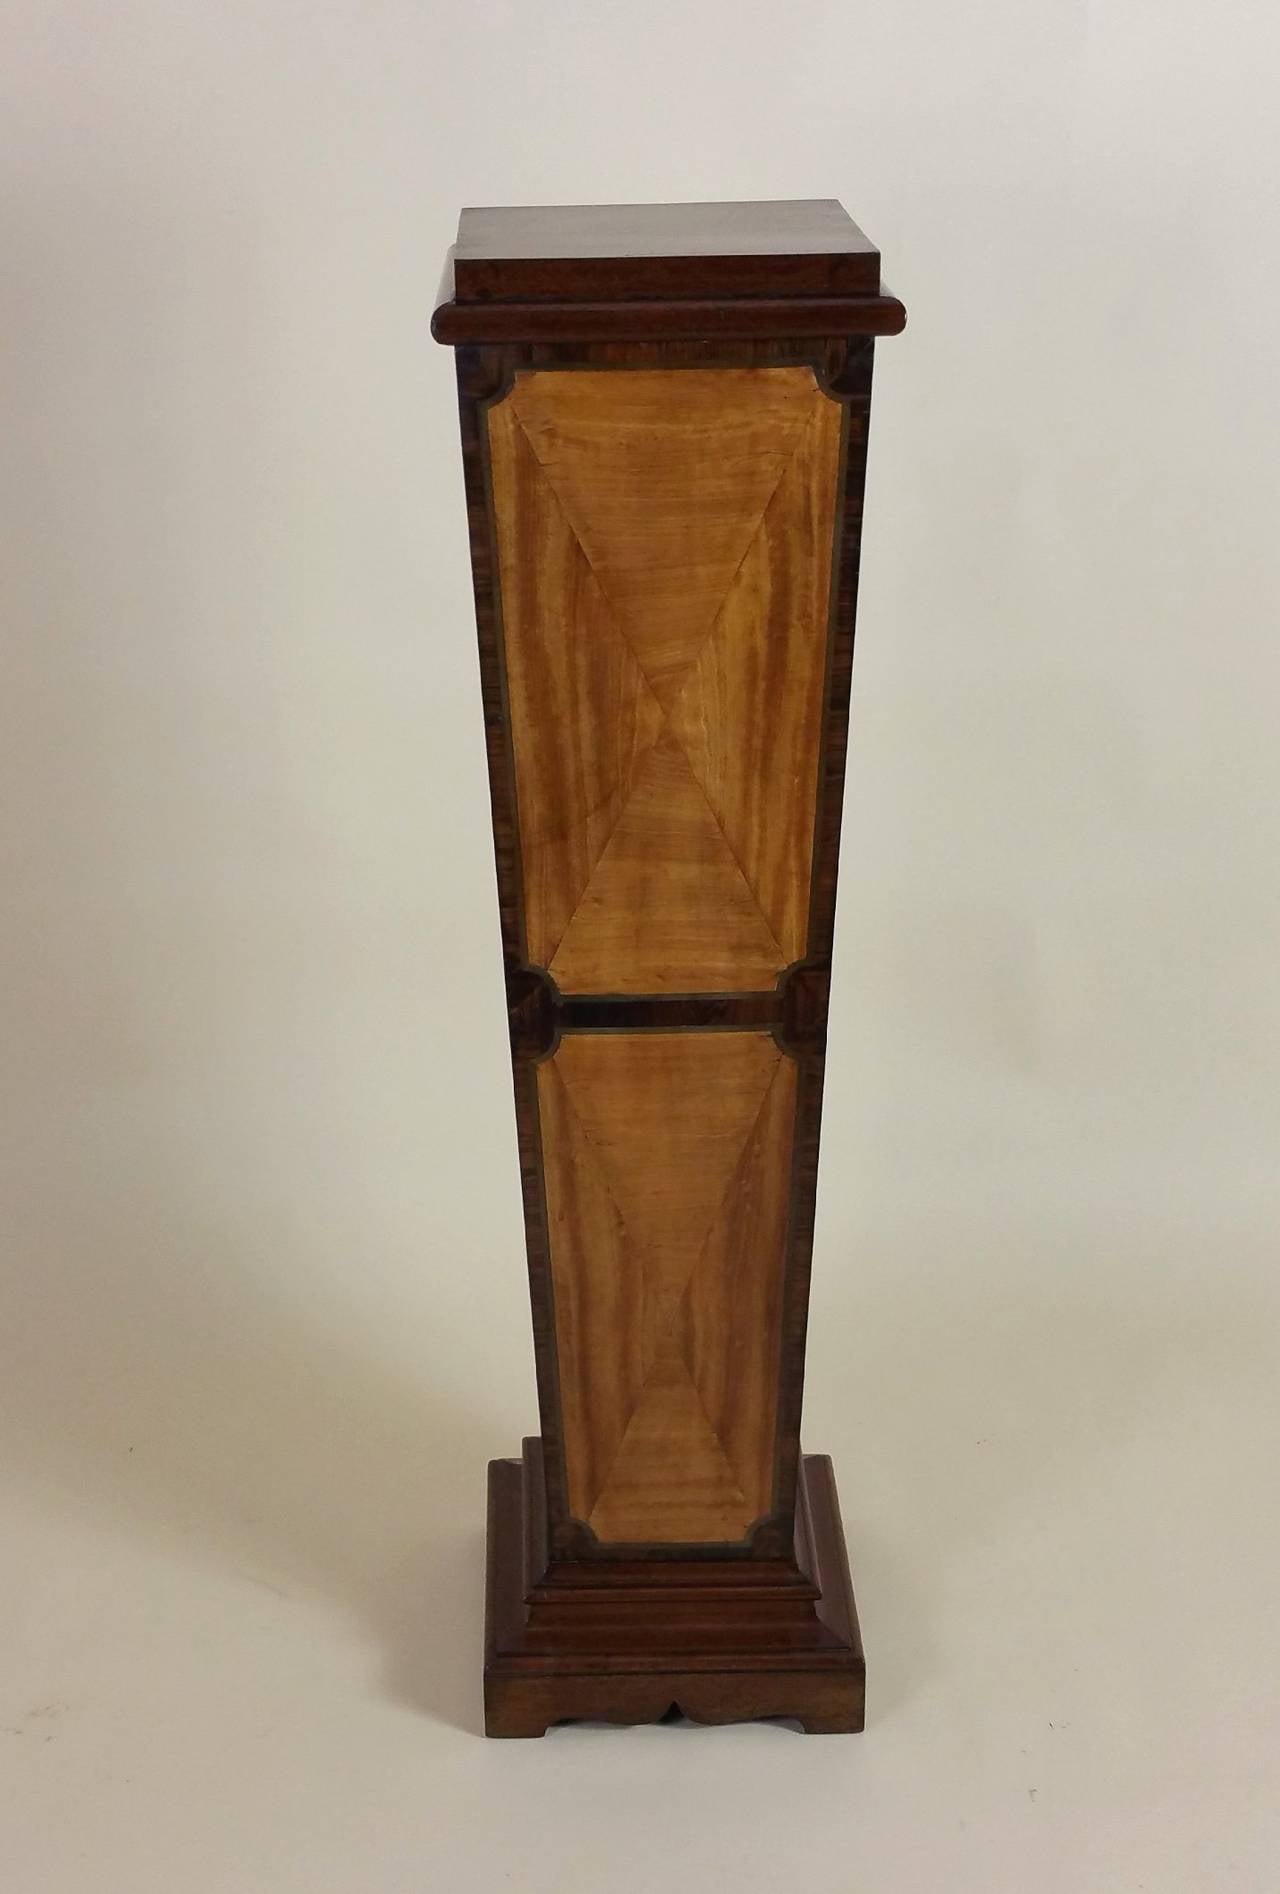 This lovely Edwardian Sheraton Revival mahogany tapered pedestal is inlaid and bonded with Satinwood and Rosewood on the front and both sides. The simple but elegant design of this pedestal would allow it to work with several different traditional